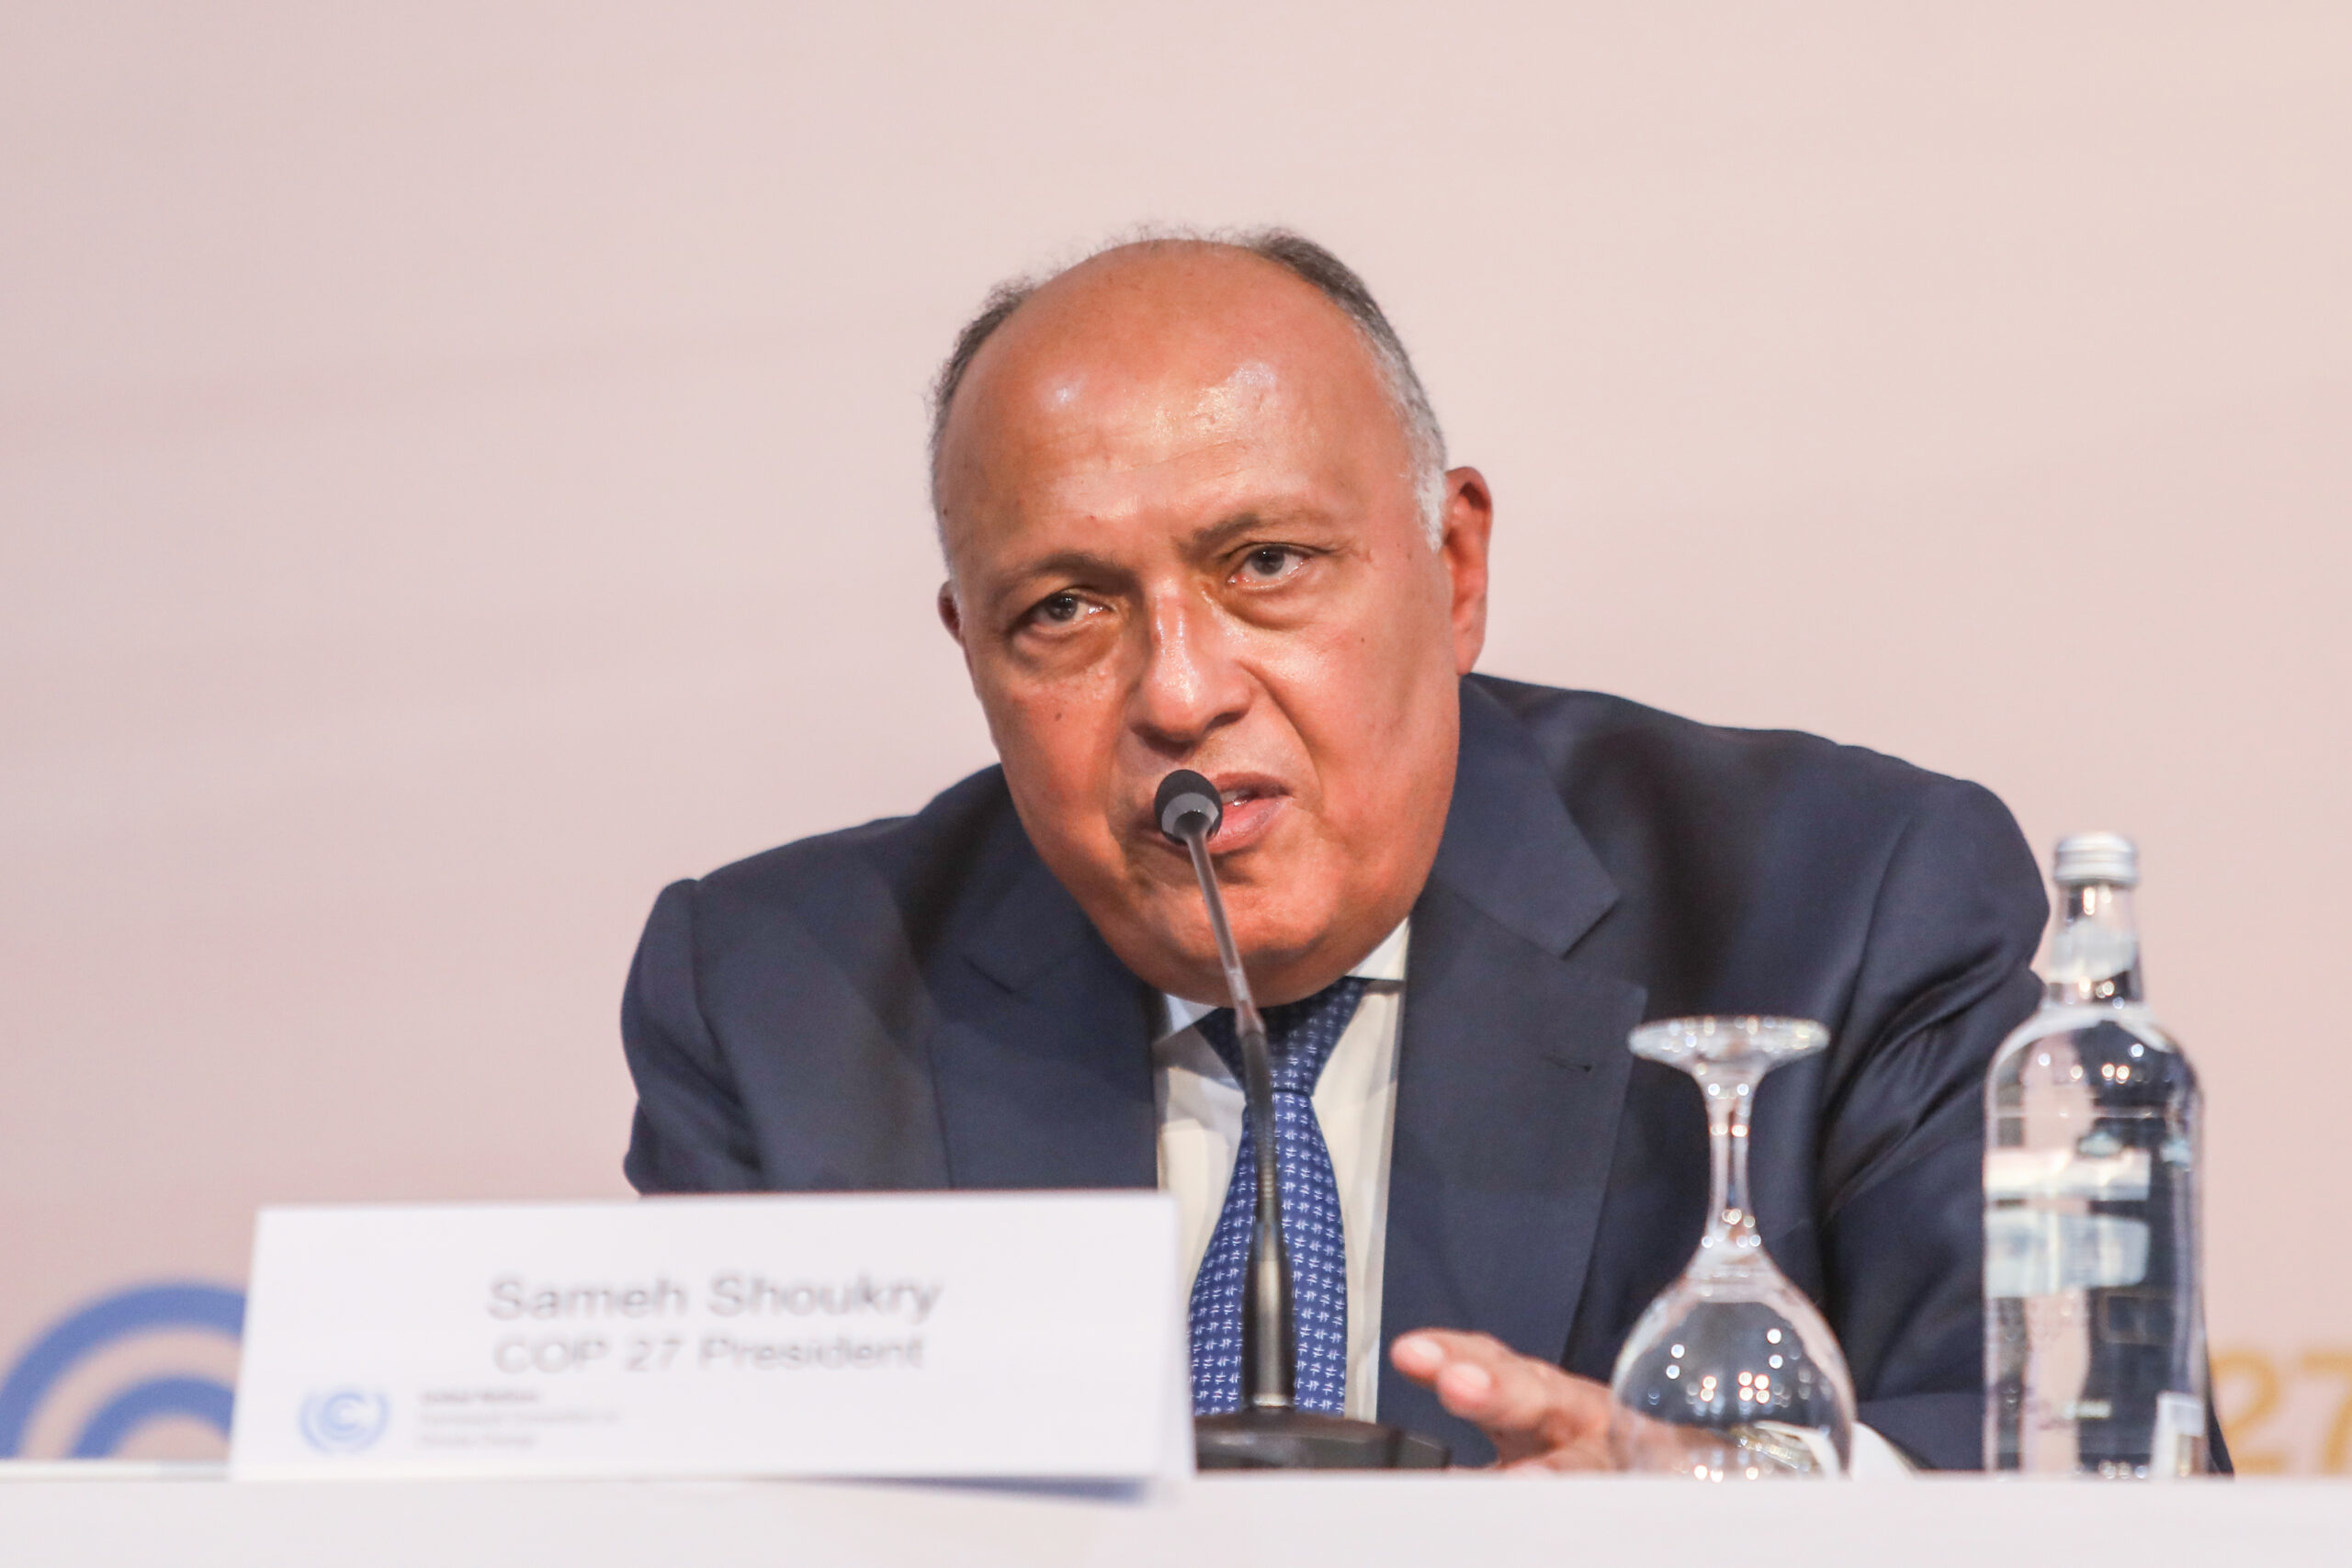 COP27 President Sameh Shoukry speak during a news conference following the opening ceremony of the 2022 United Nations Climate Change Conference at Sharm El Sheikh, Egypt [Mohamed Abdel Hamid/Anadolu Agency]